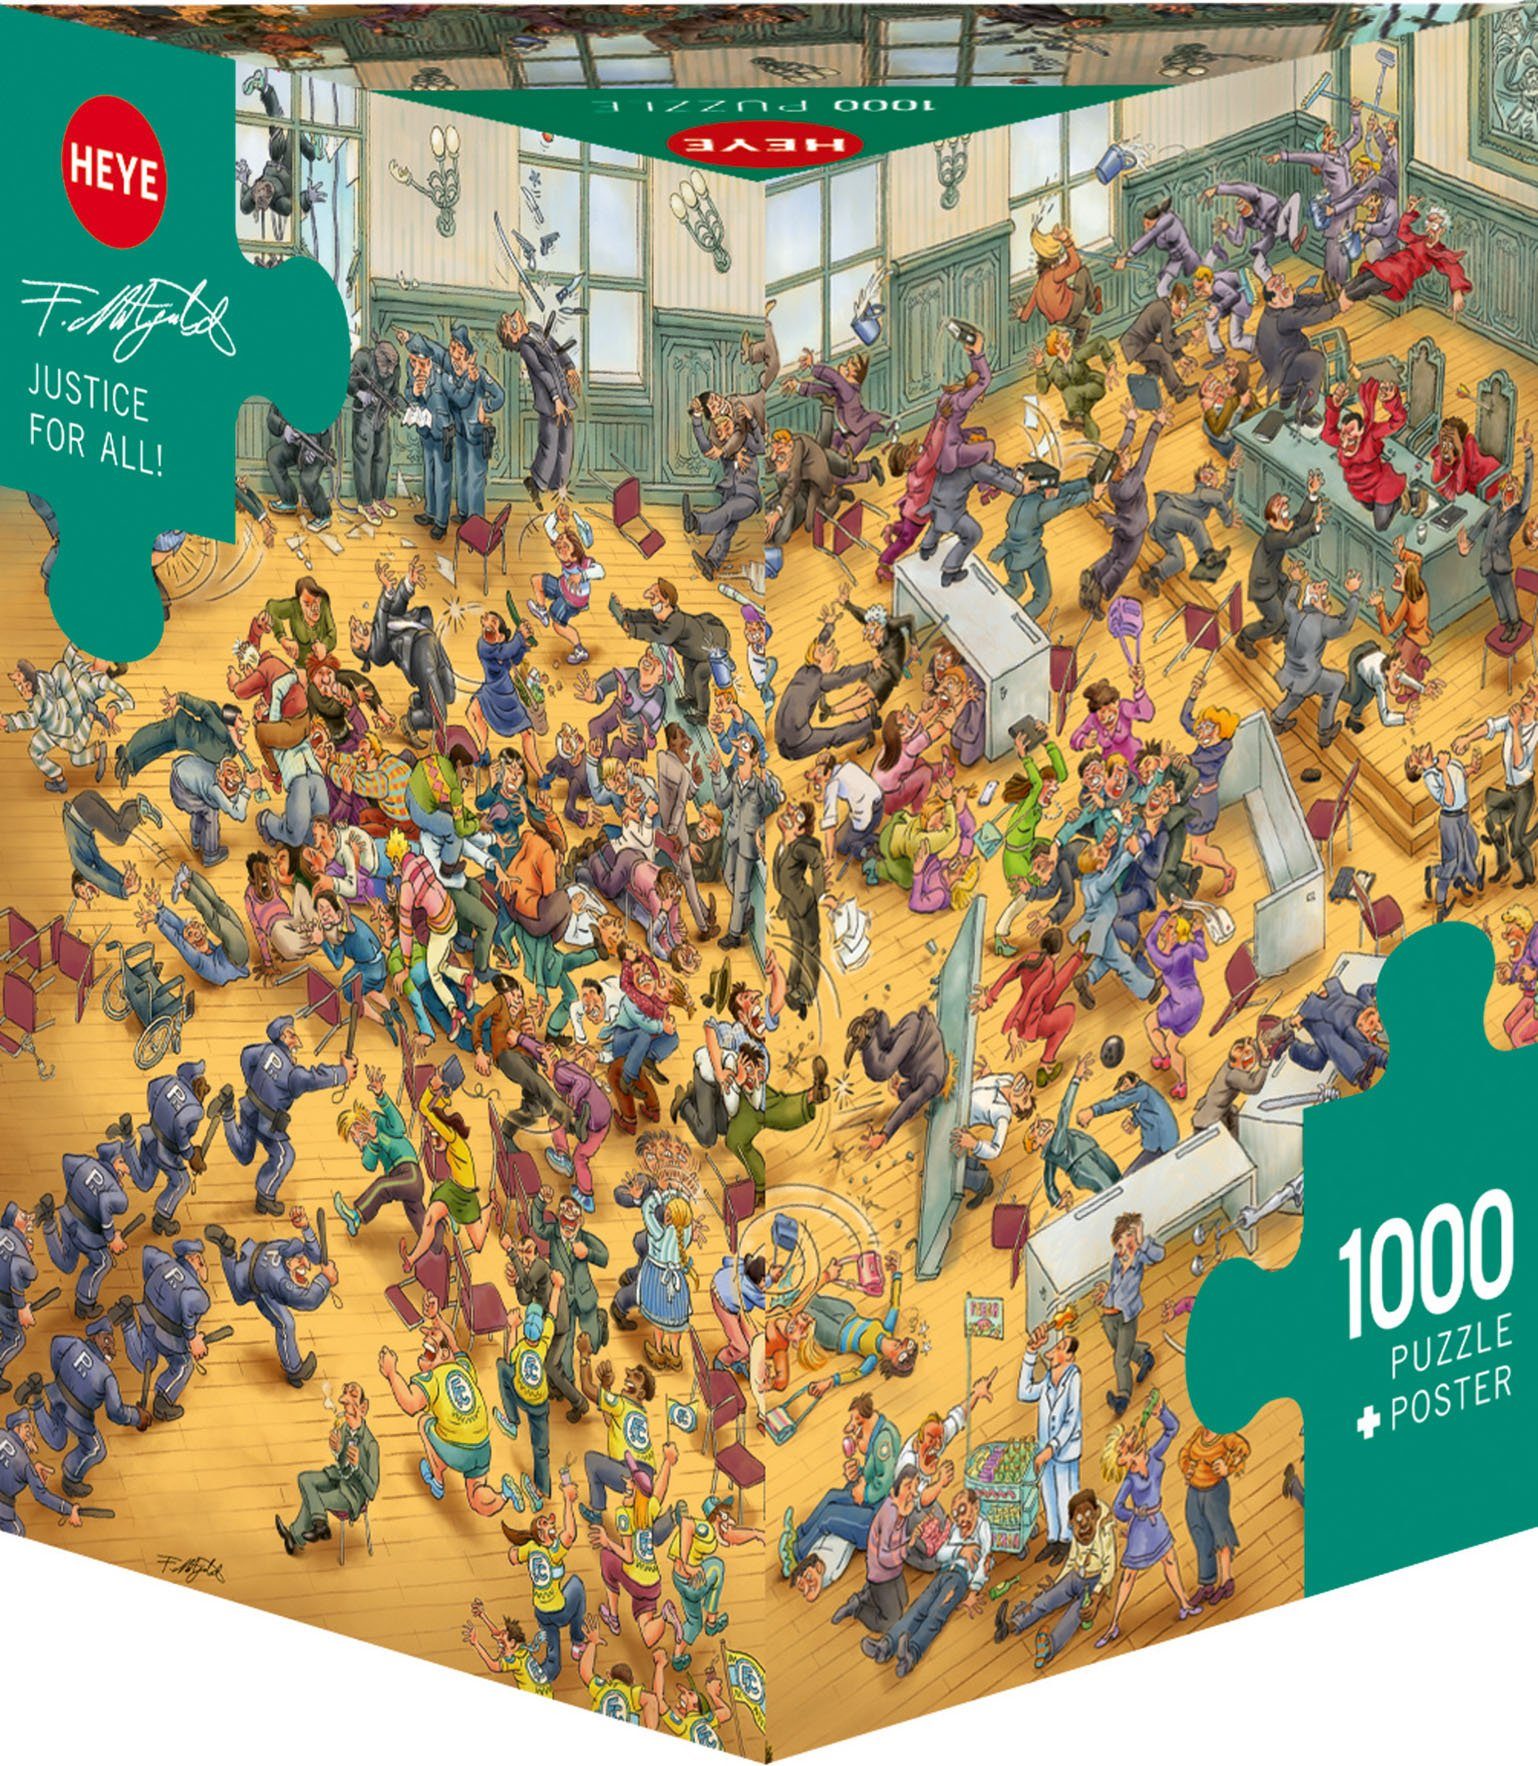 Puzzleteile, HEYE Mitgutsch, Europe All! For Justice Puzzle 1000 Made in